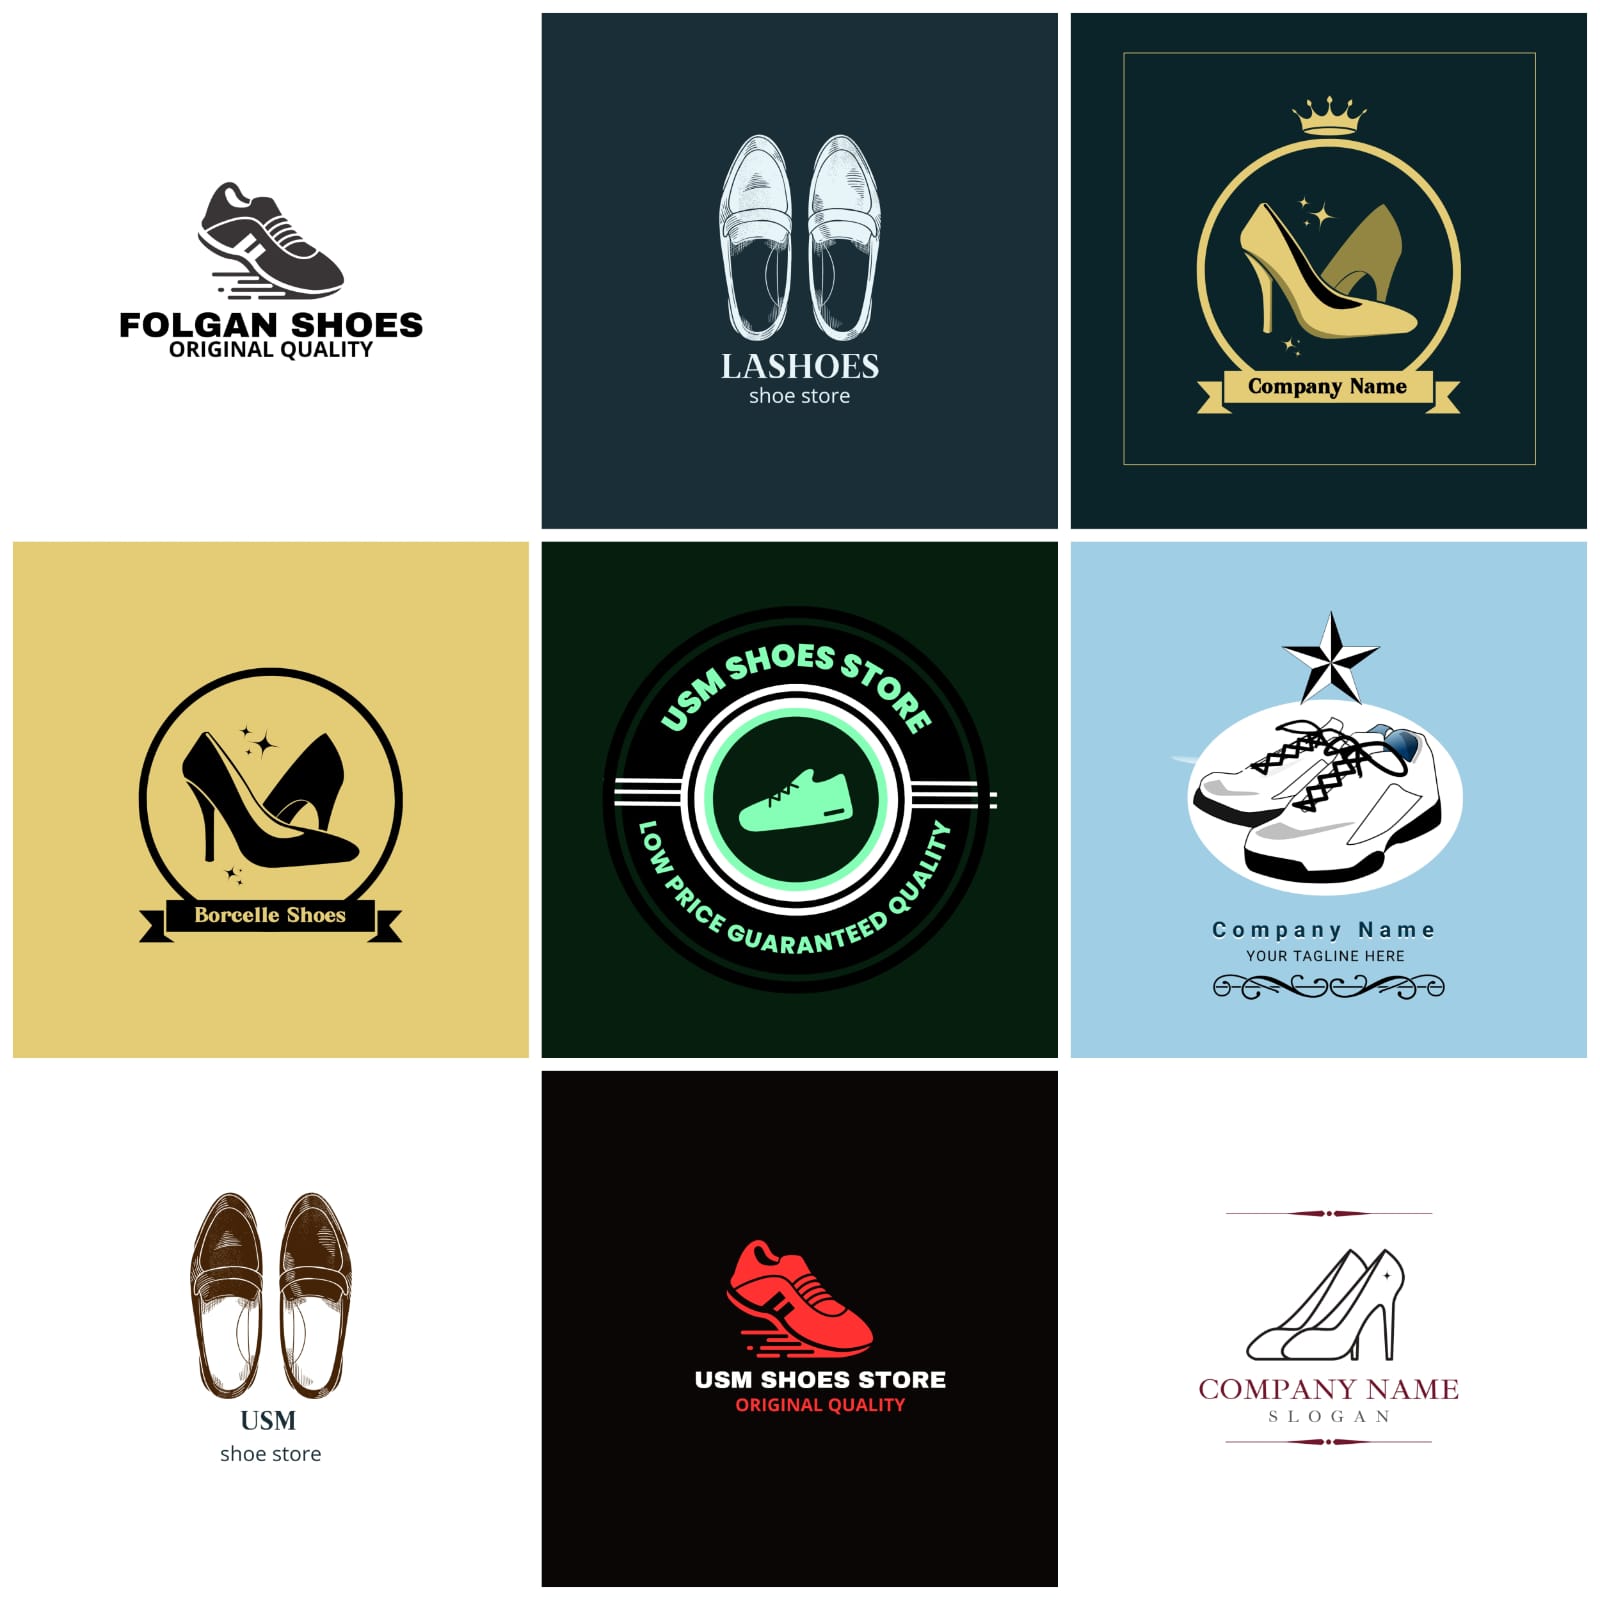 Series of logos for shoes and shoes shops.